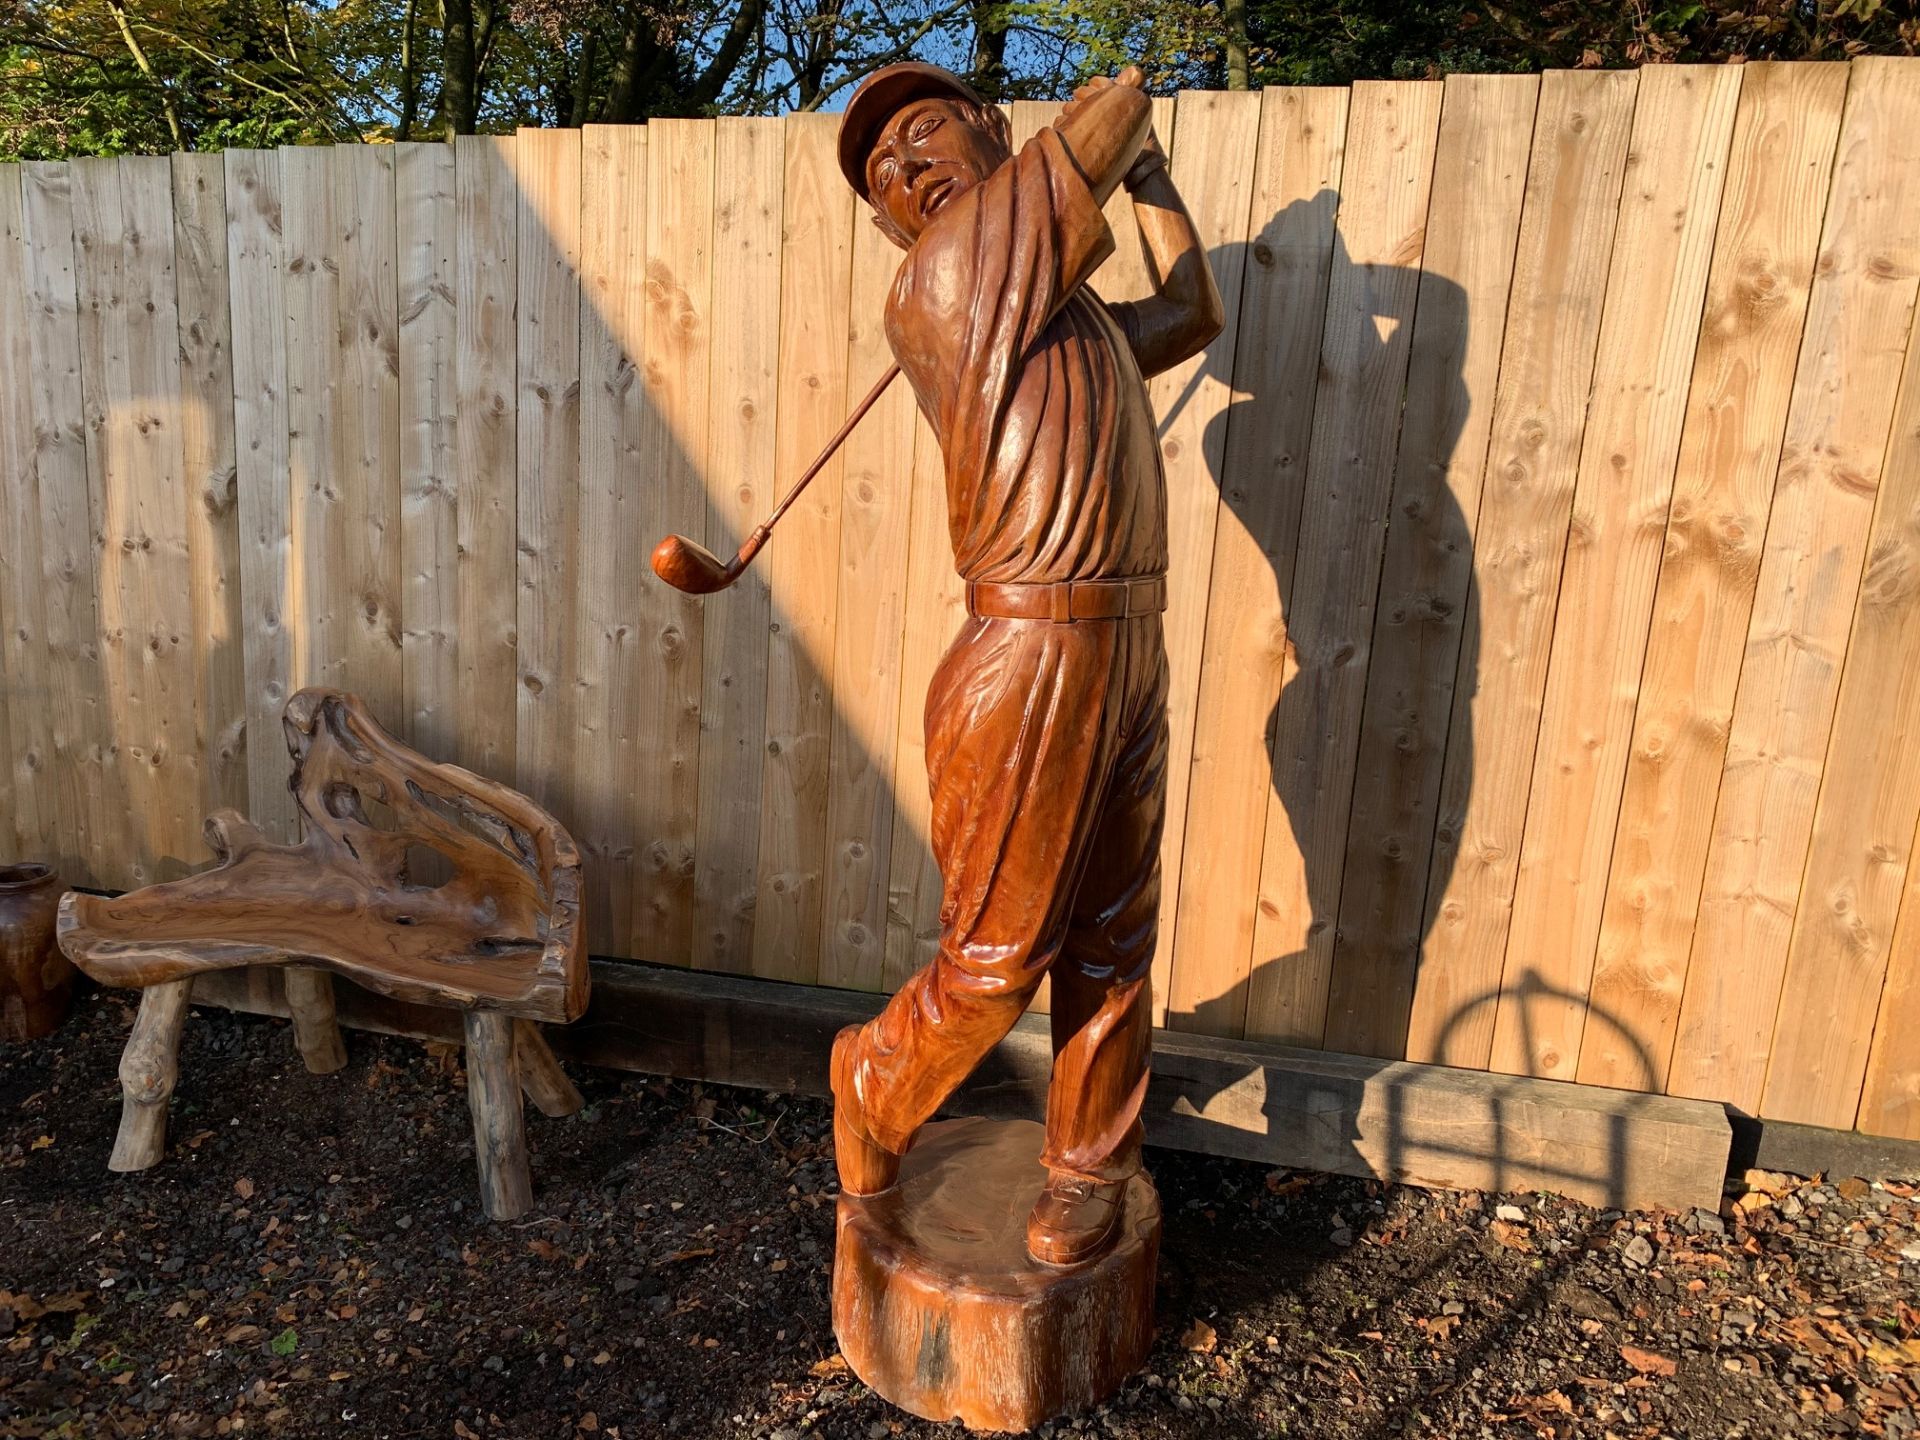 MUSEUM QUALITY HANDCARVED STRIKING 2M HIGH SOLID WOOD GOLFER IN MOTION